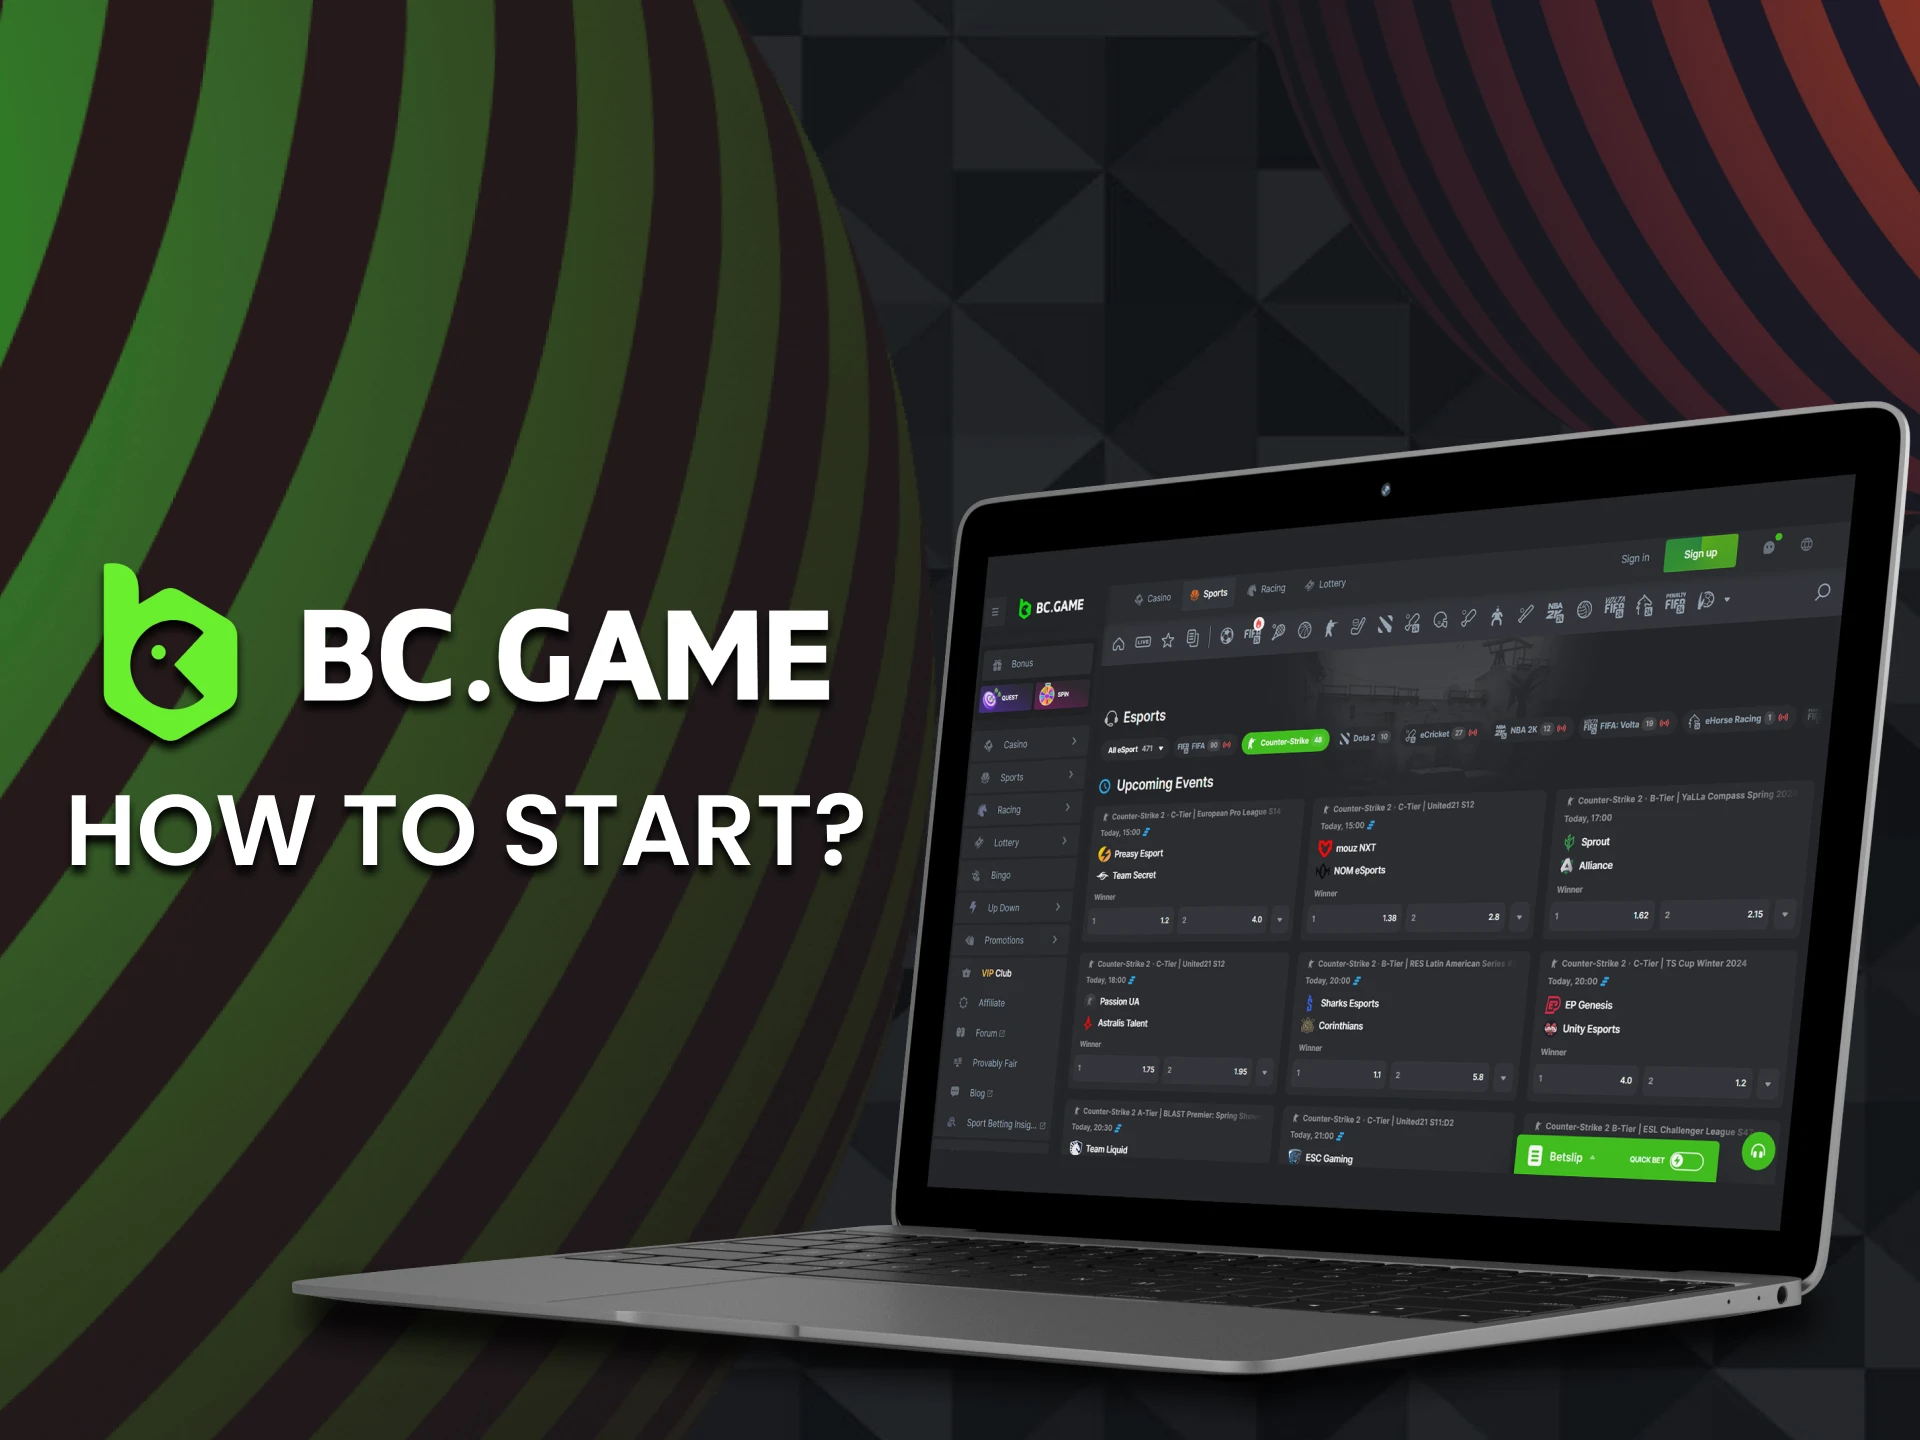 Deposit money and select eSports events and start betting at BC Game.